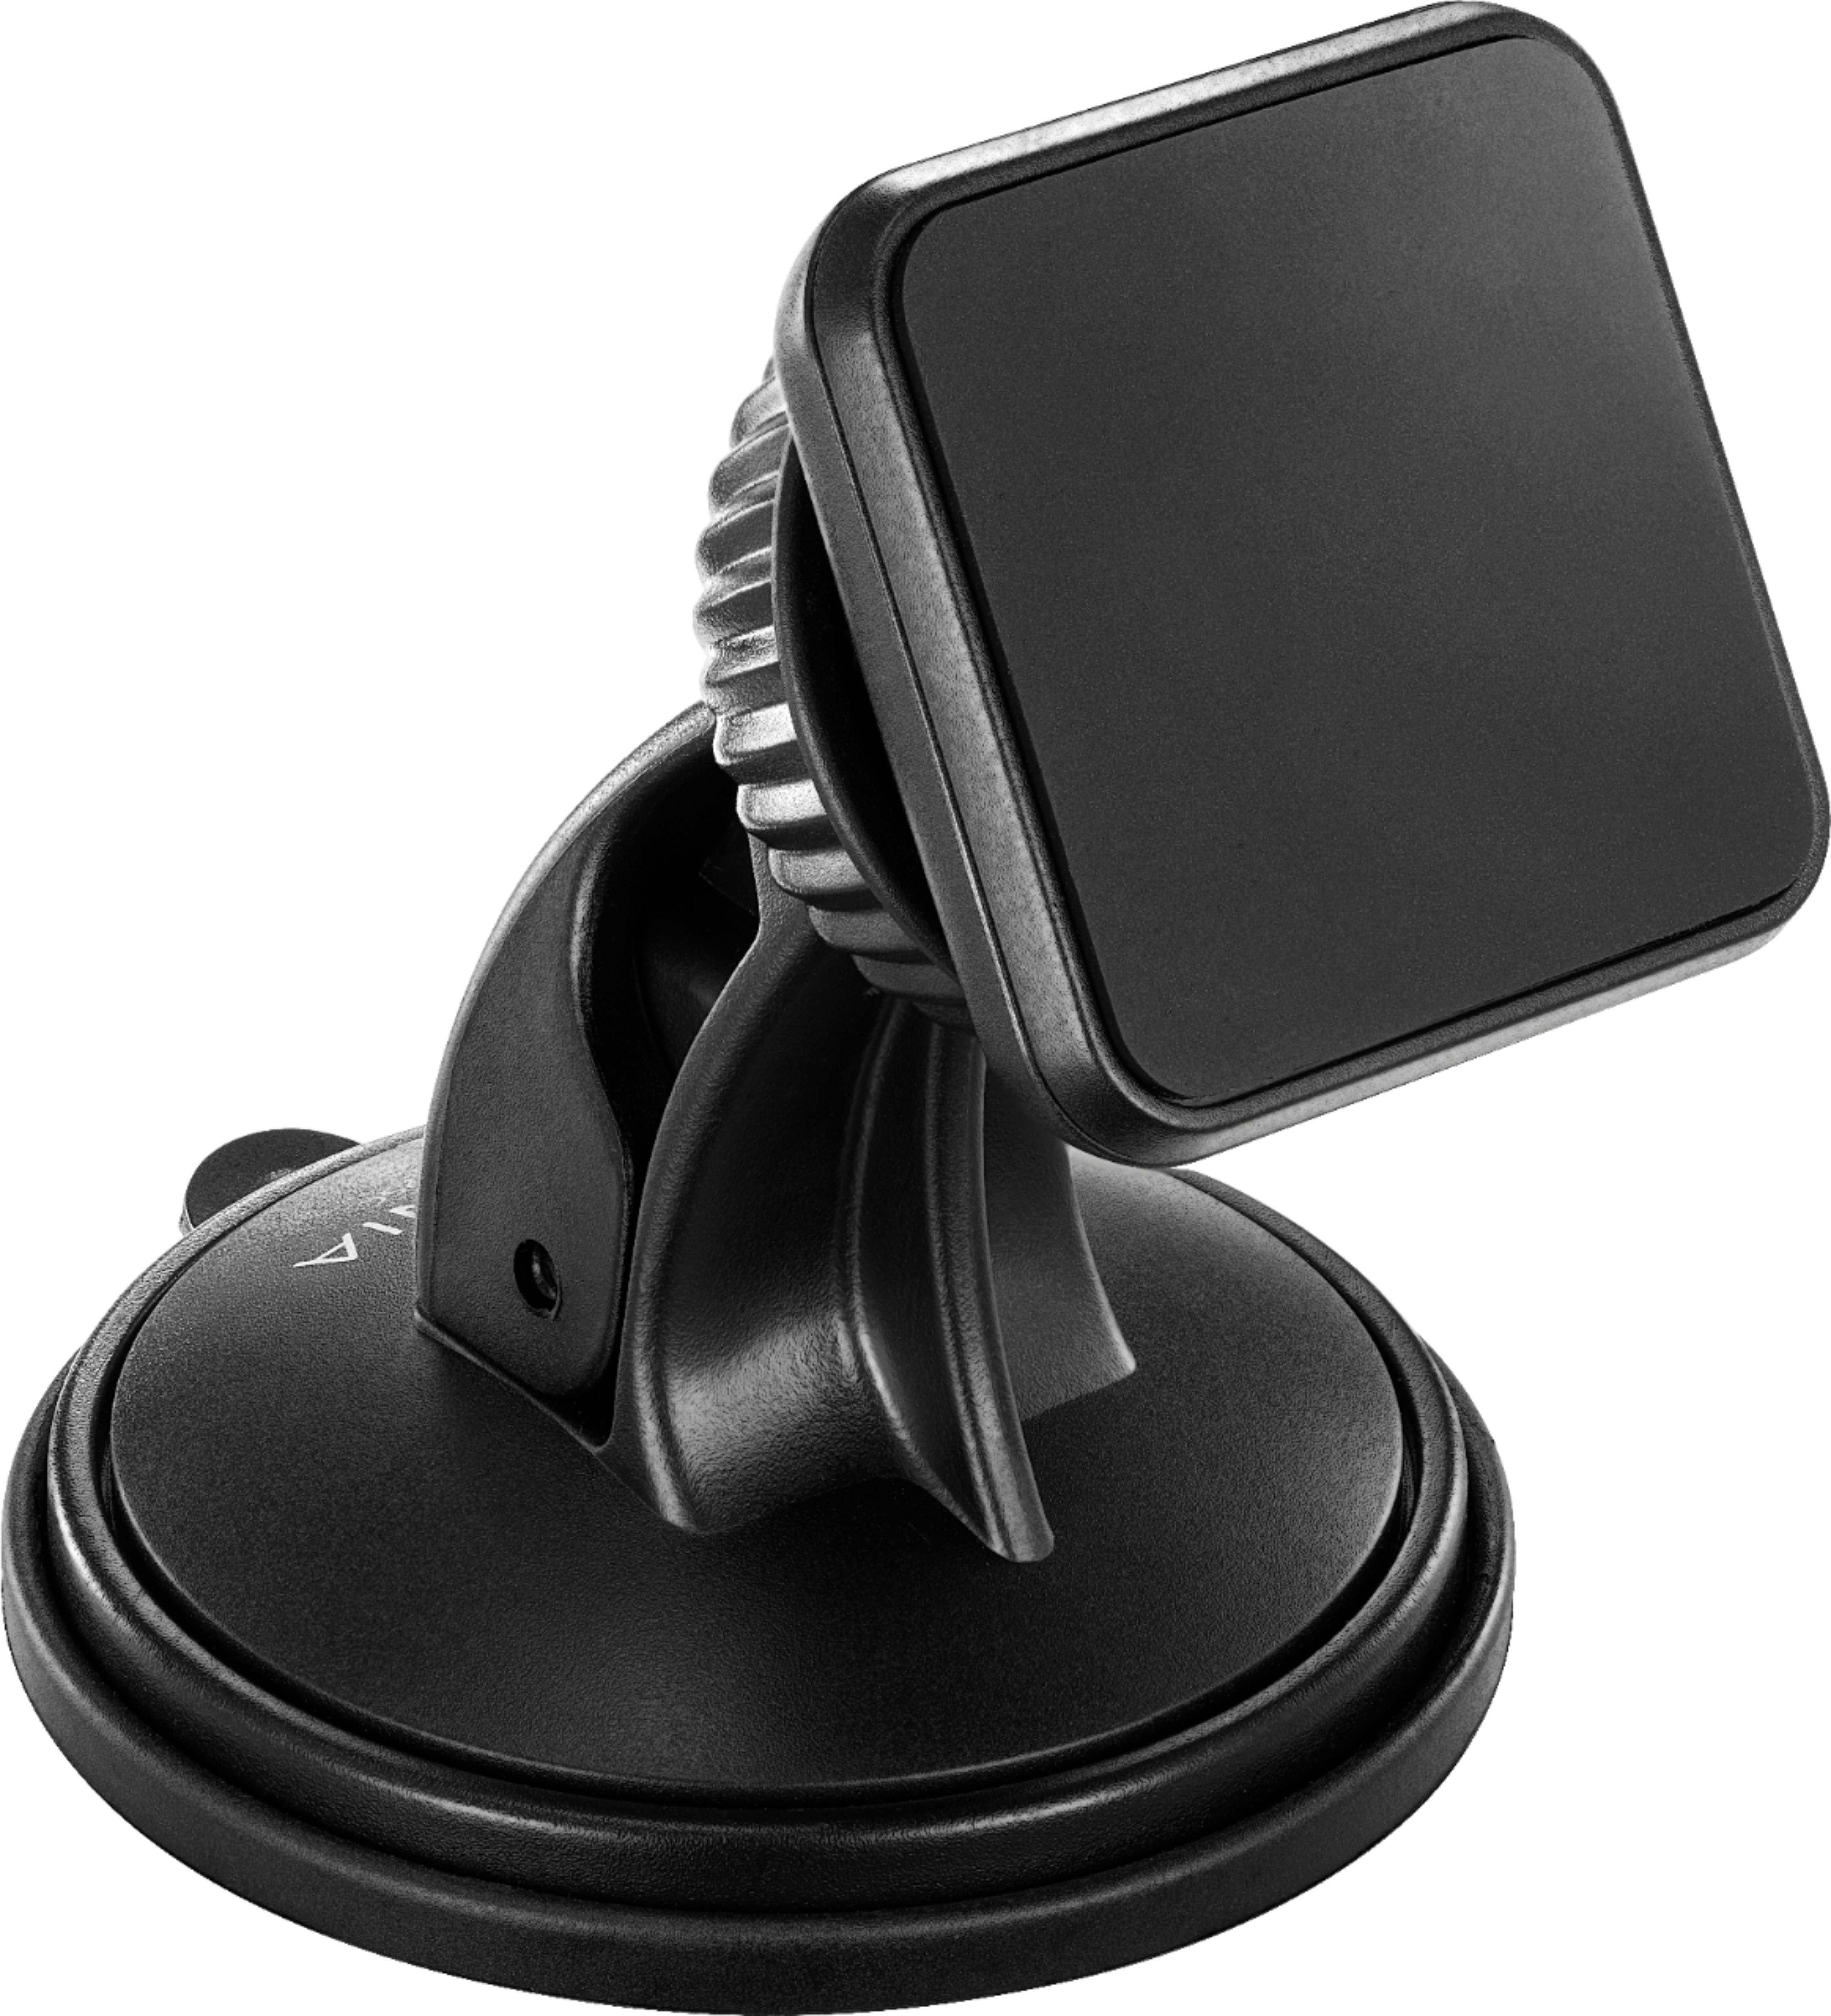 Angle View: Insignia™ - Magnetic Car Holder for Most Cell Phones - Black